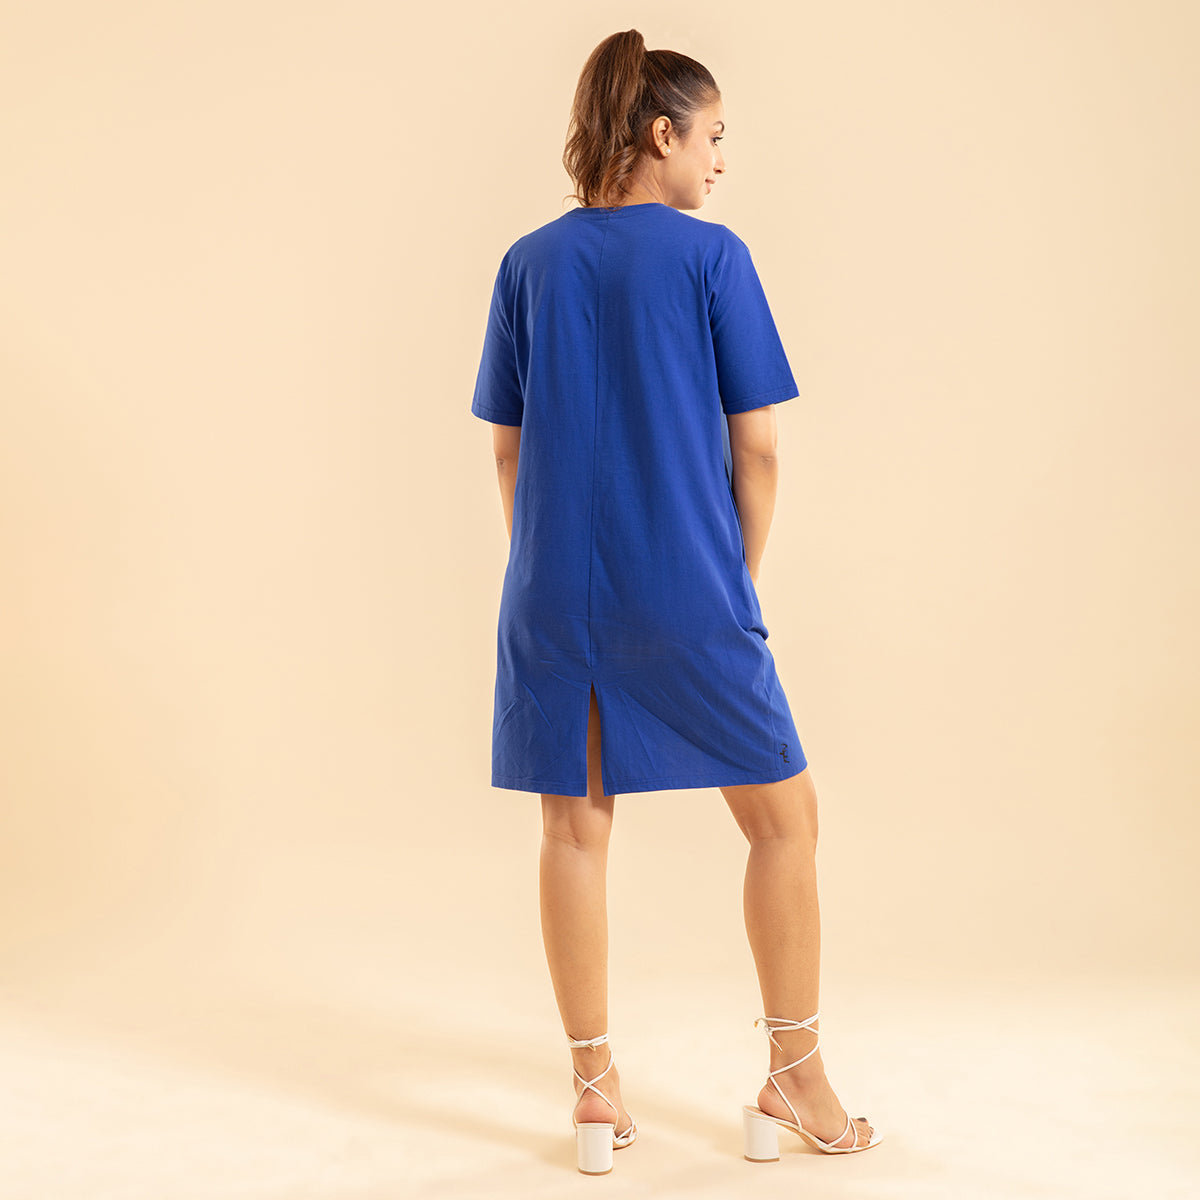 Nykd All Day Heart on my sleeve dress- NYLE102 Bright Cobalt